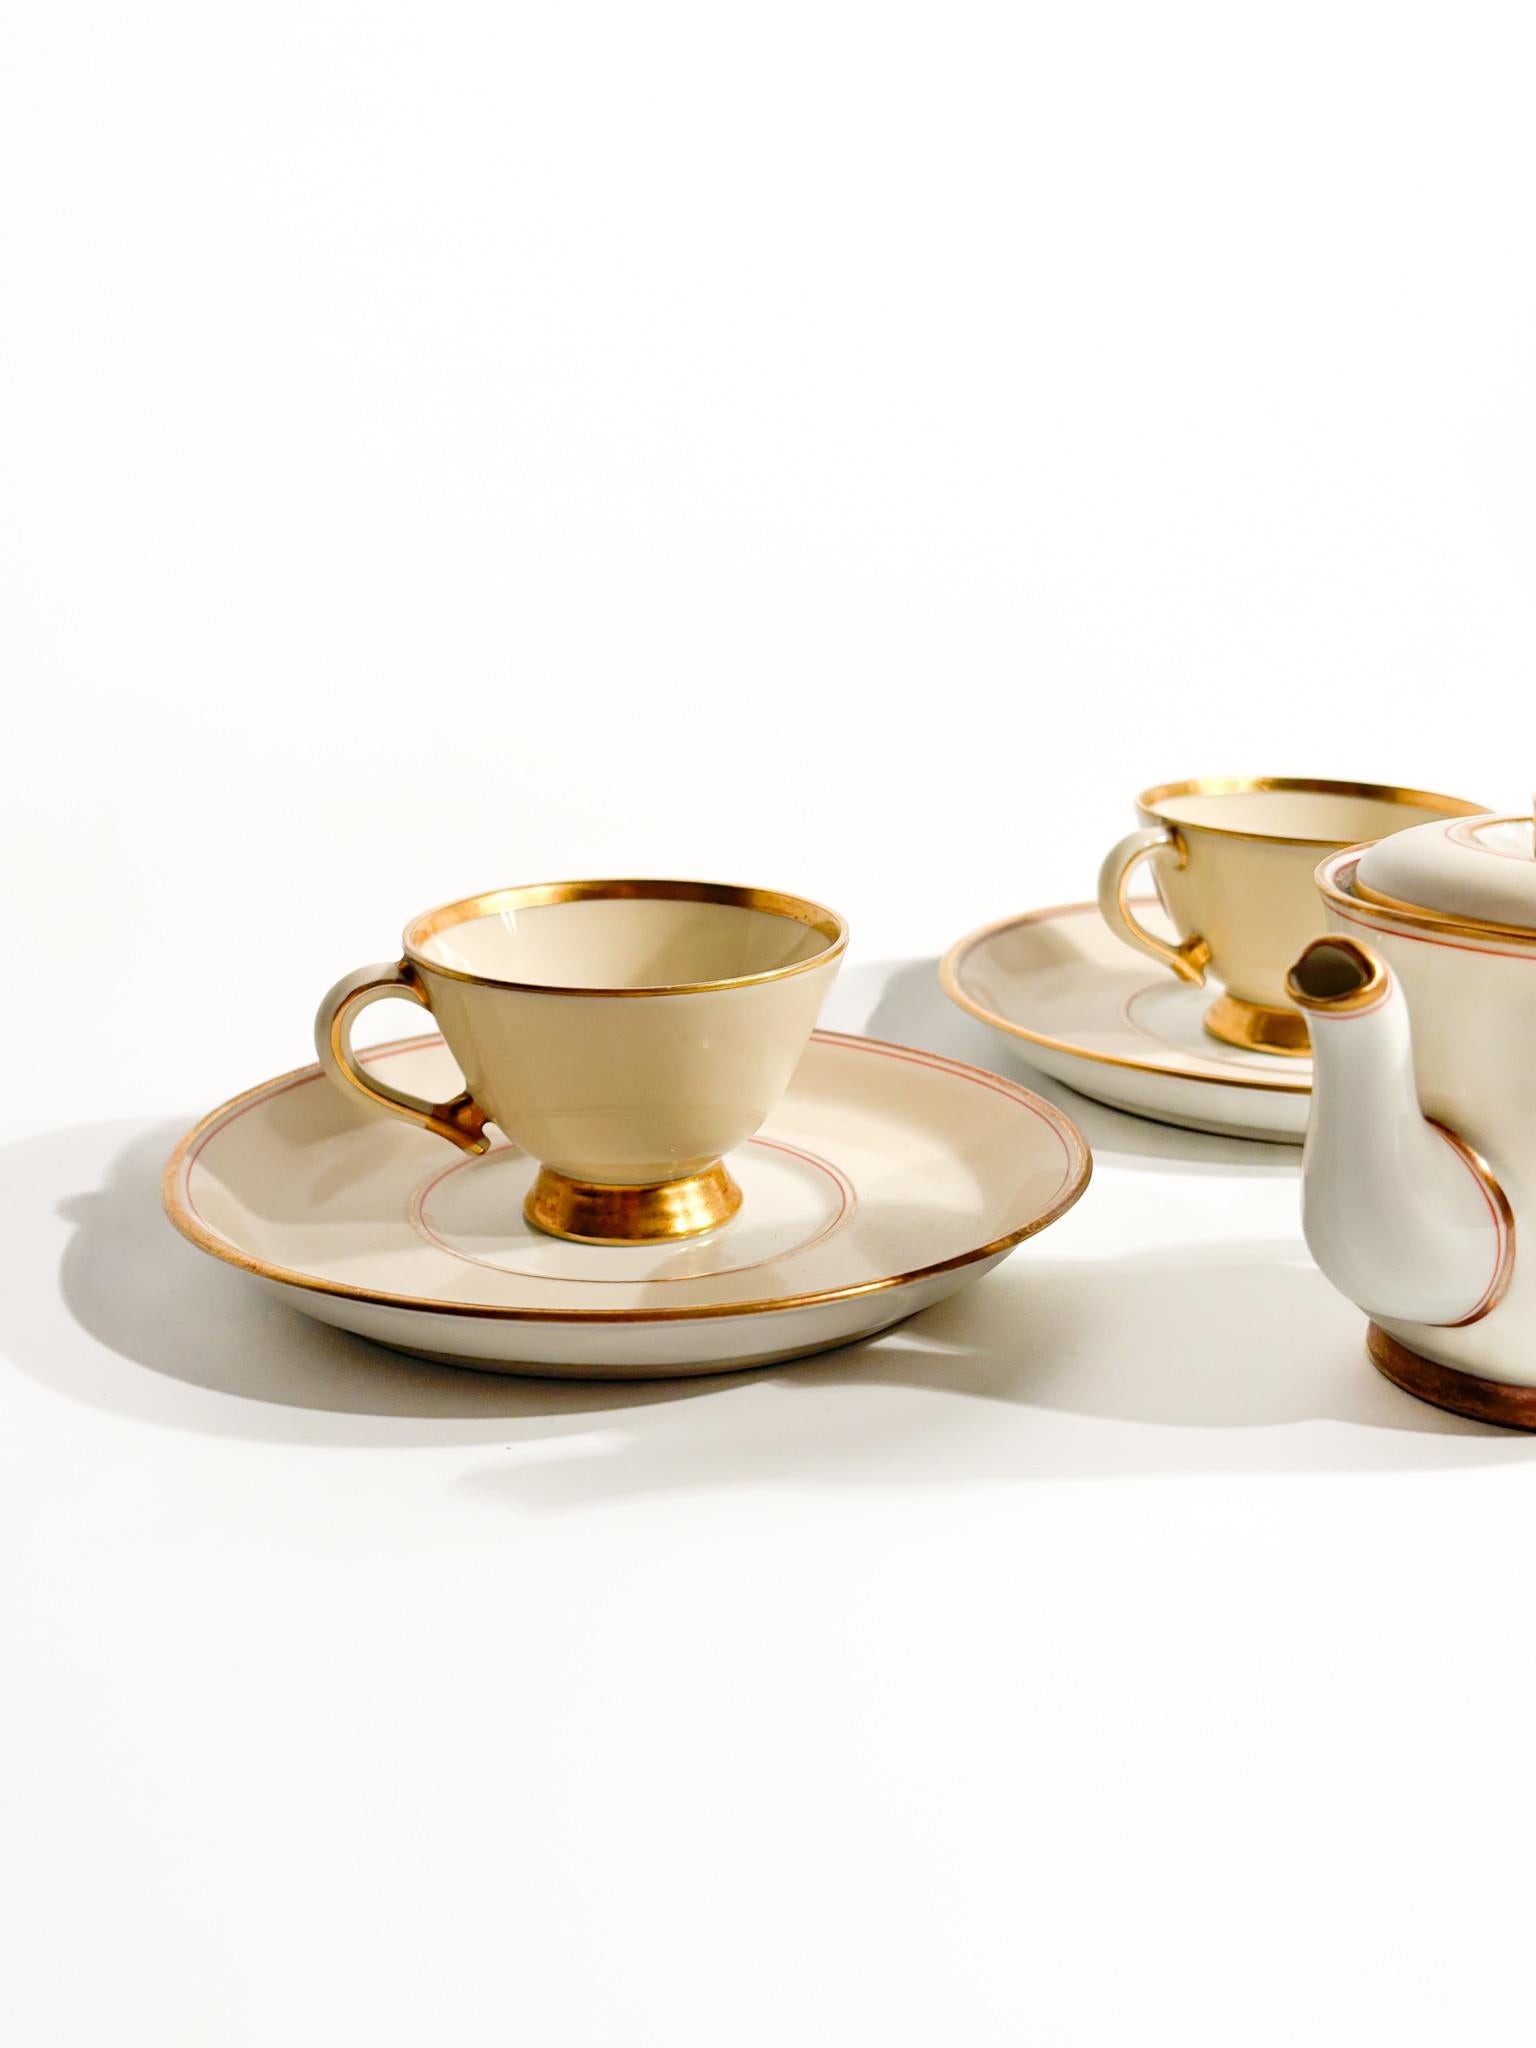 Mid-20th Century Gio Ponti Cups and Coffee Pot Designed for the Victoria Lloyd Triestino Ship  For Sale